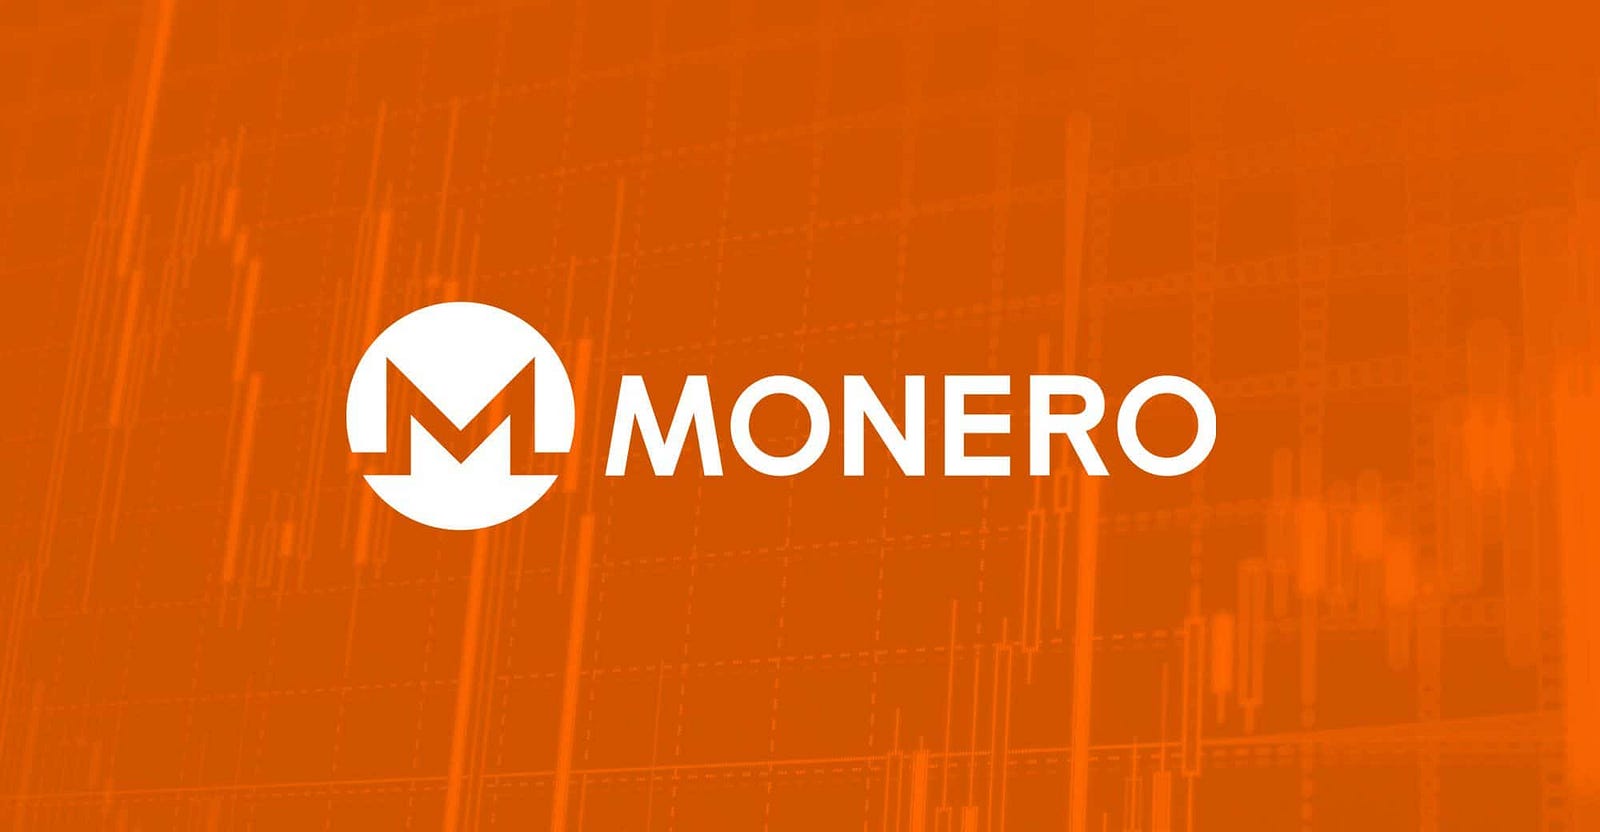 Monero continues its resistance to ASIC mining